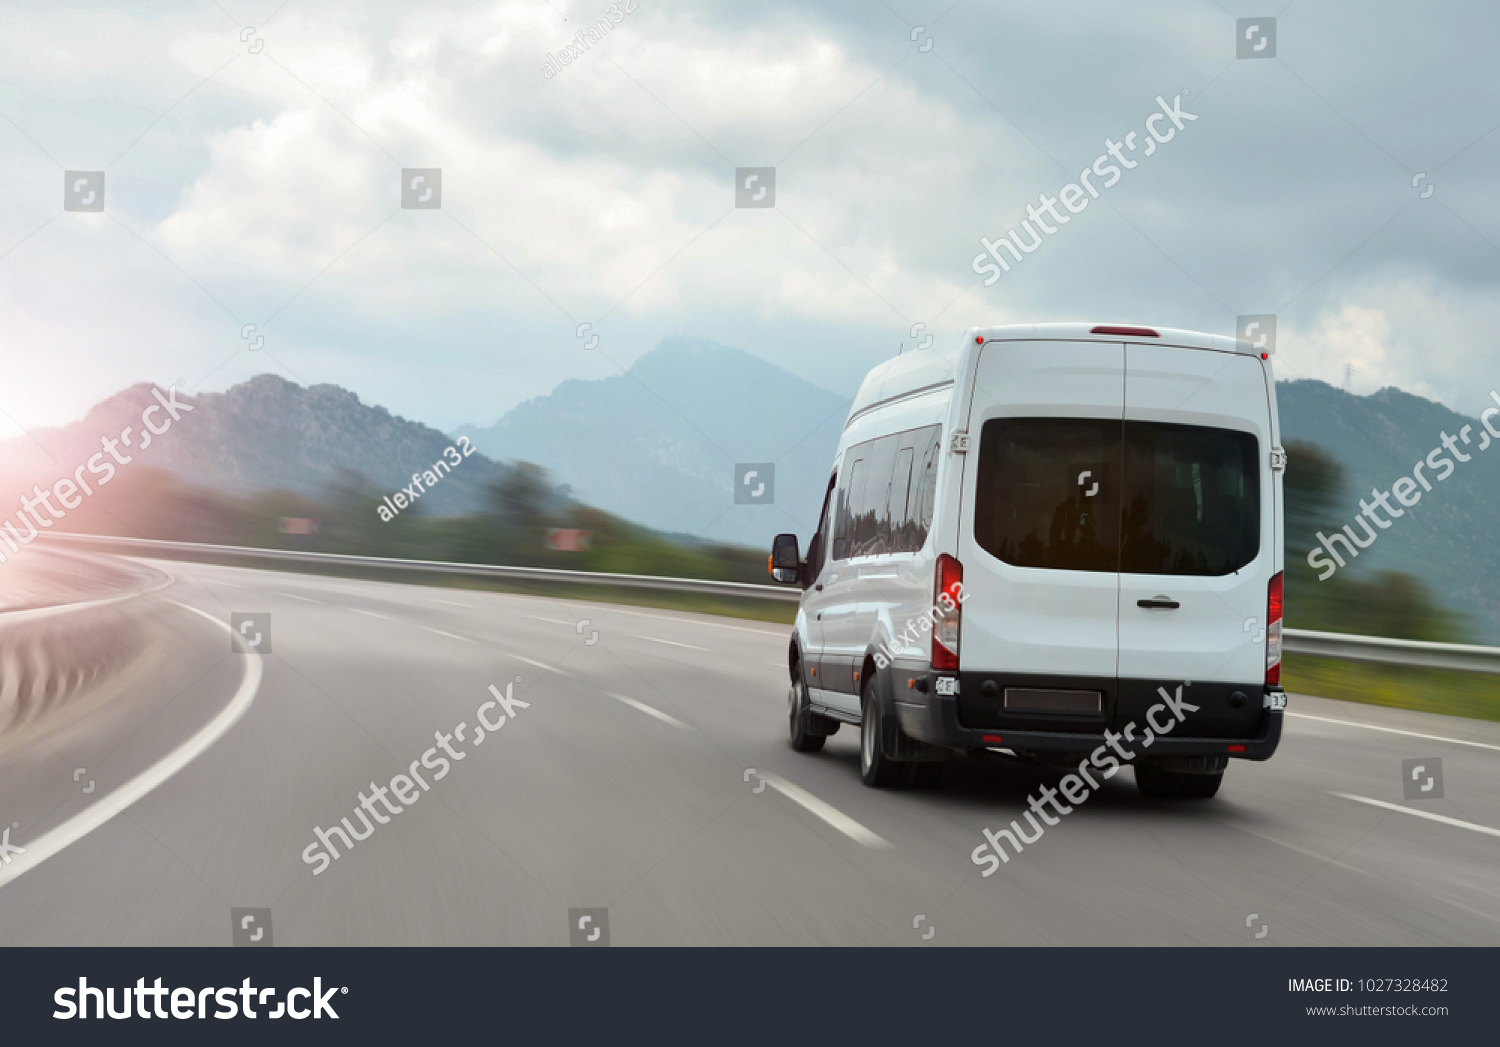 passenger bus van accelerating on a background of mountains #1027328482